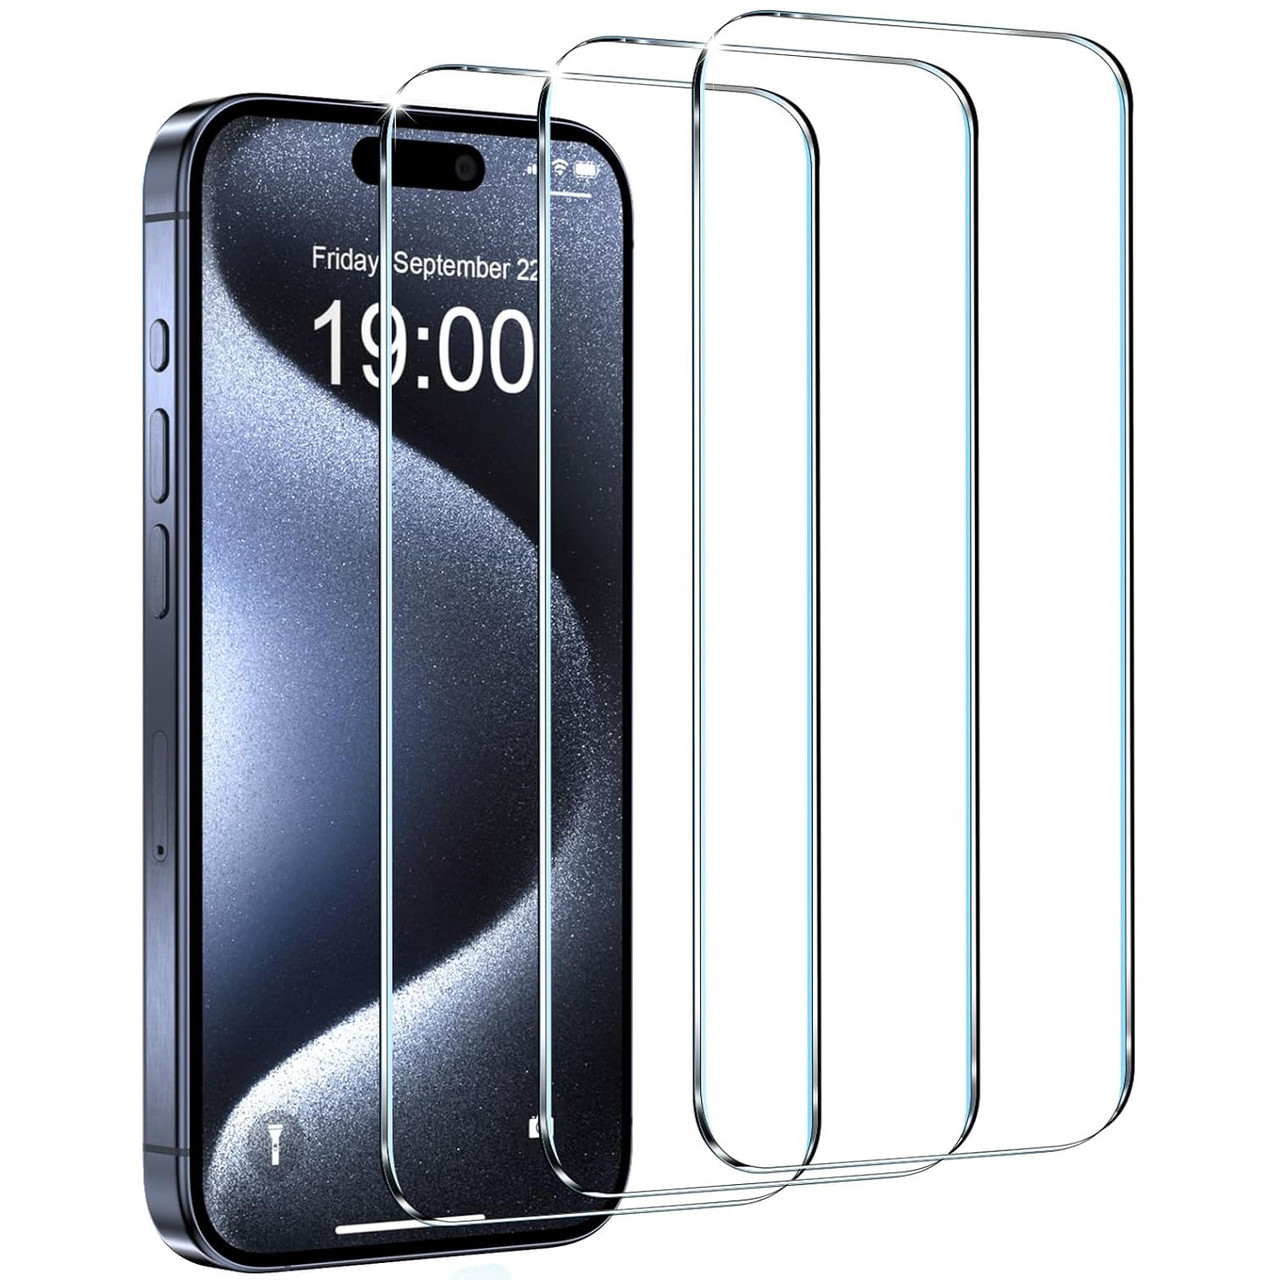 iPhone 13 Pro / 13 Pro Max | Camera Protector Glass [3 Pack]